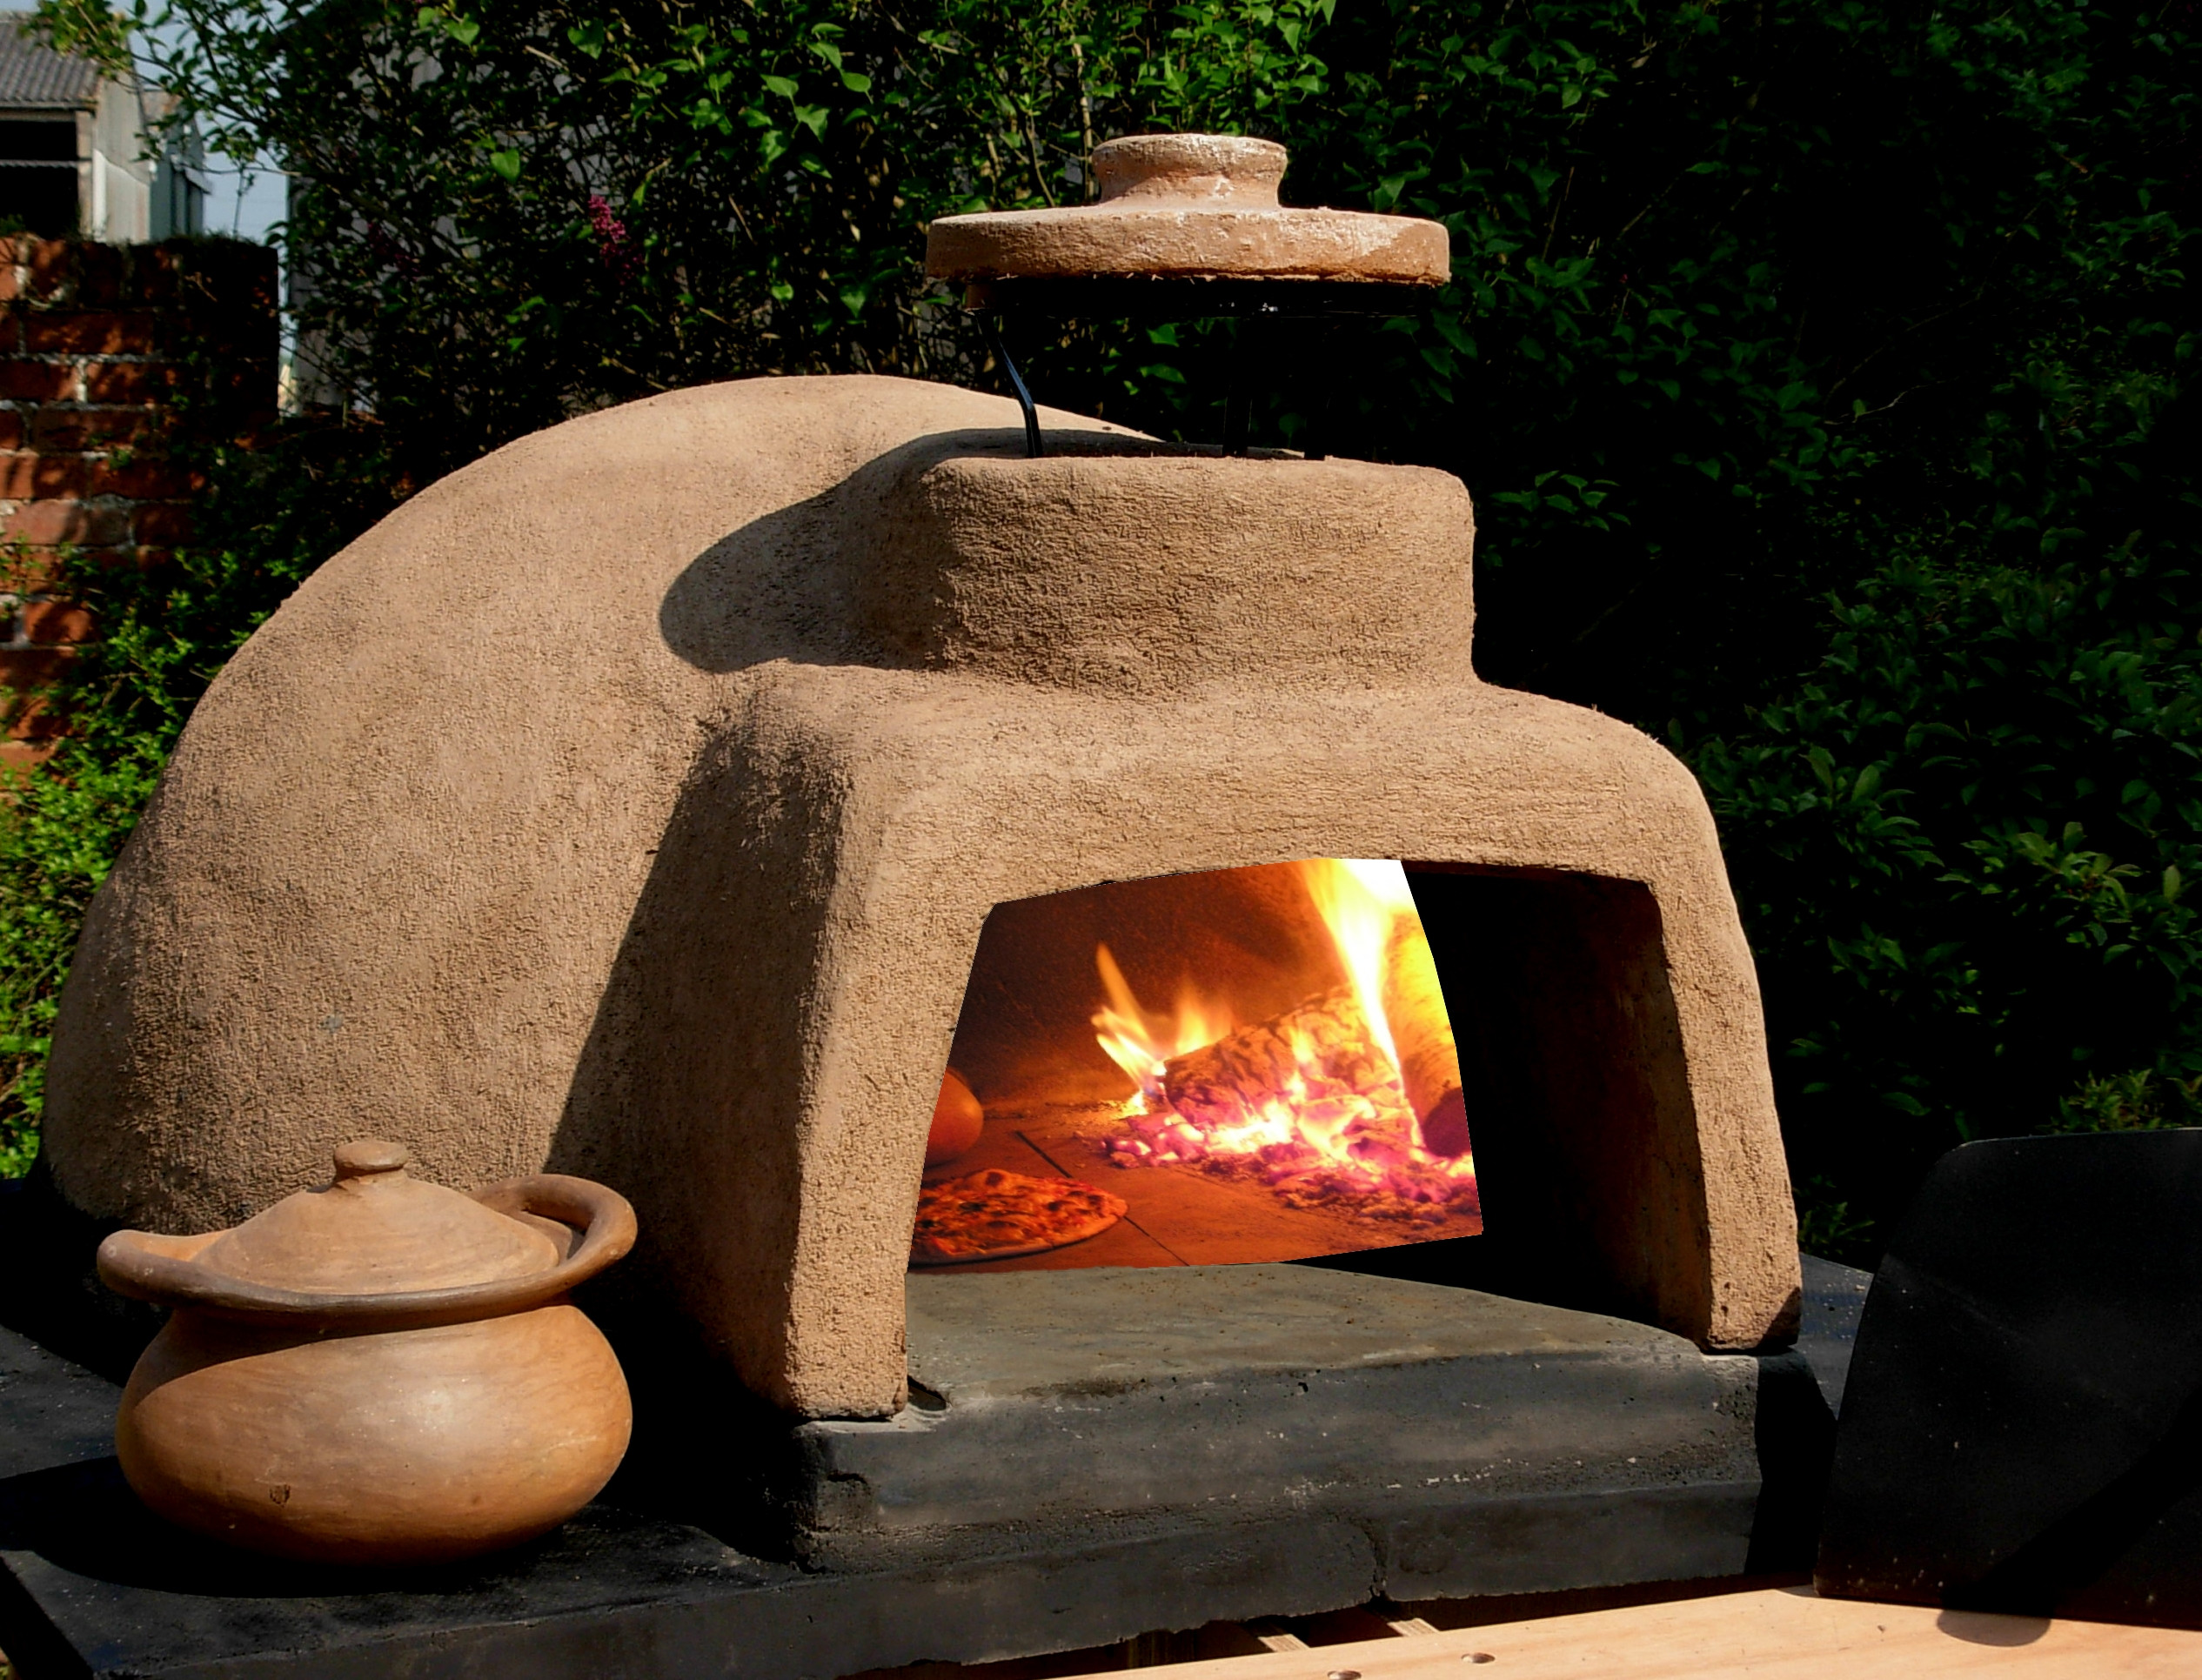 DIY Wood Fired Pizza Oven
 15 DIY Pizza Oven Plans For Outdoors Backing – The Self